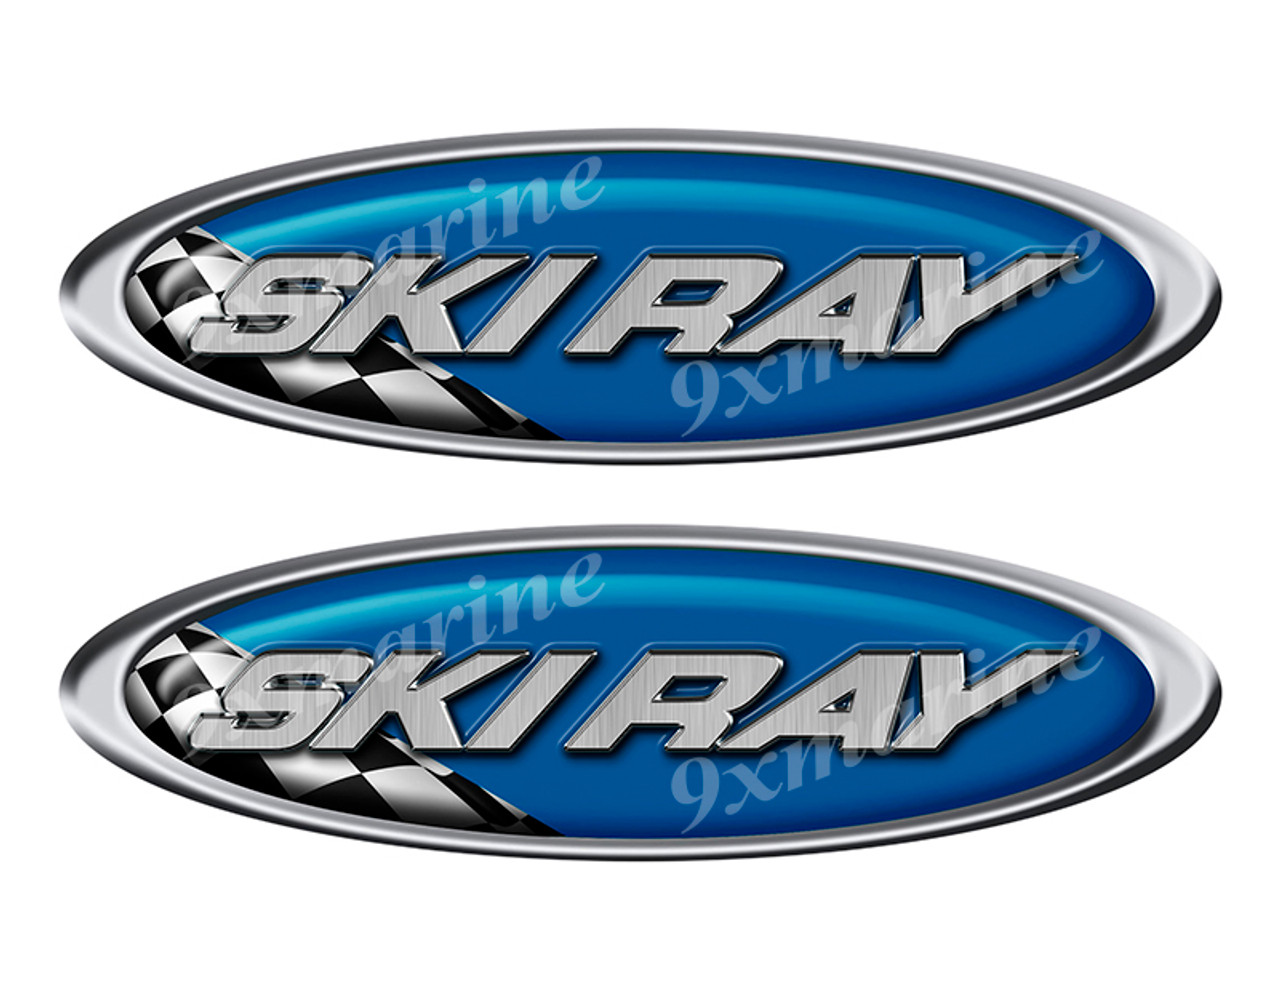 Two Ski Ray Vinyl Racing Oval Stickers - 10" long each